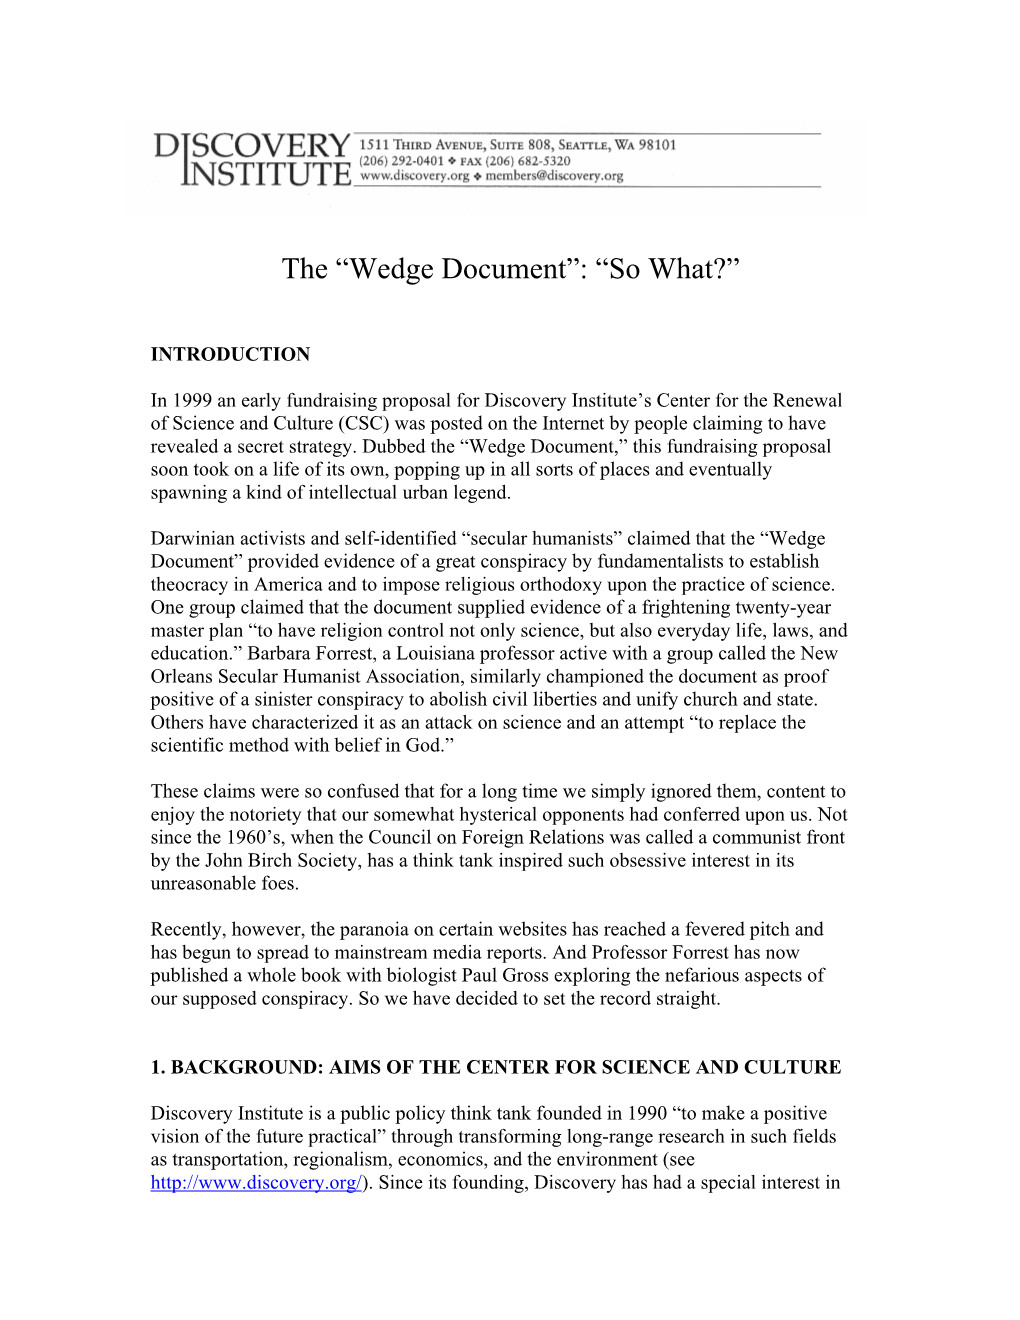 Wedge Document”: “So What?”